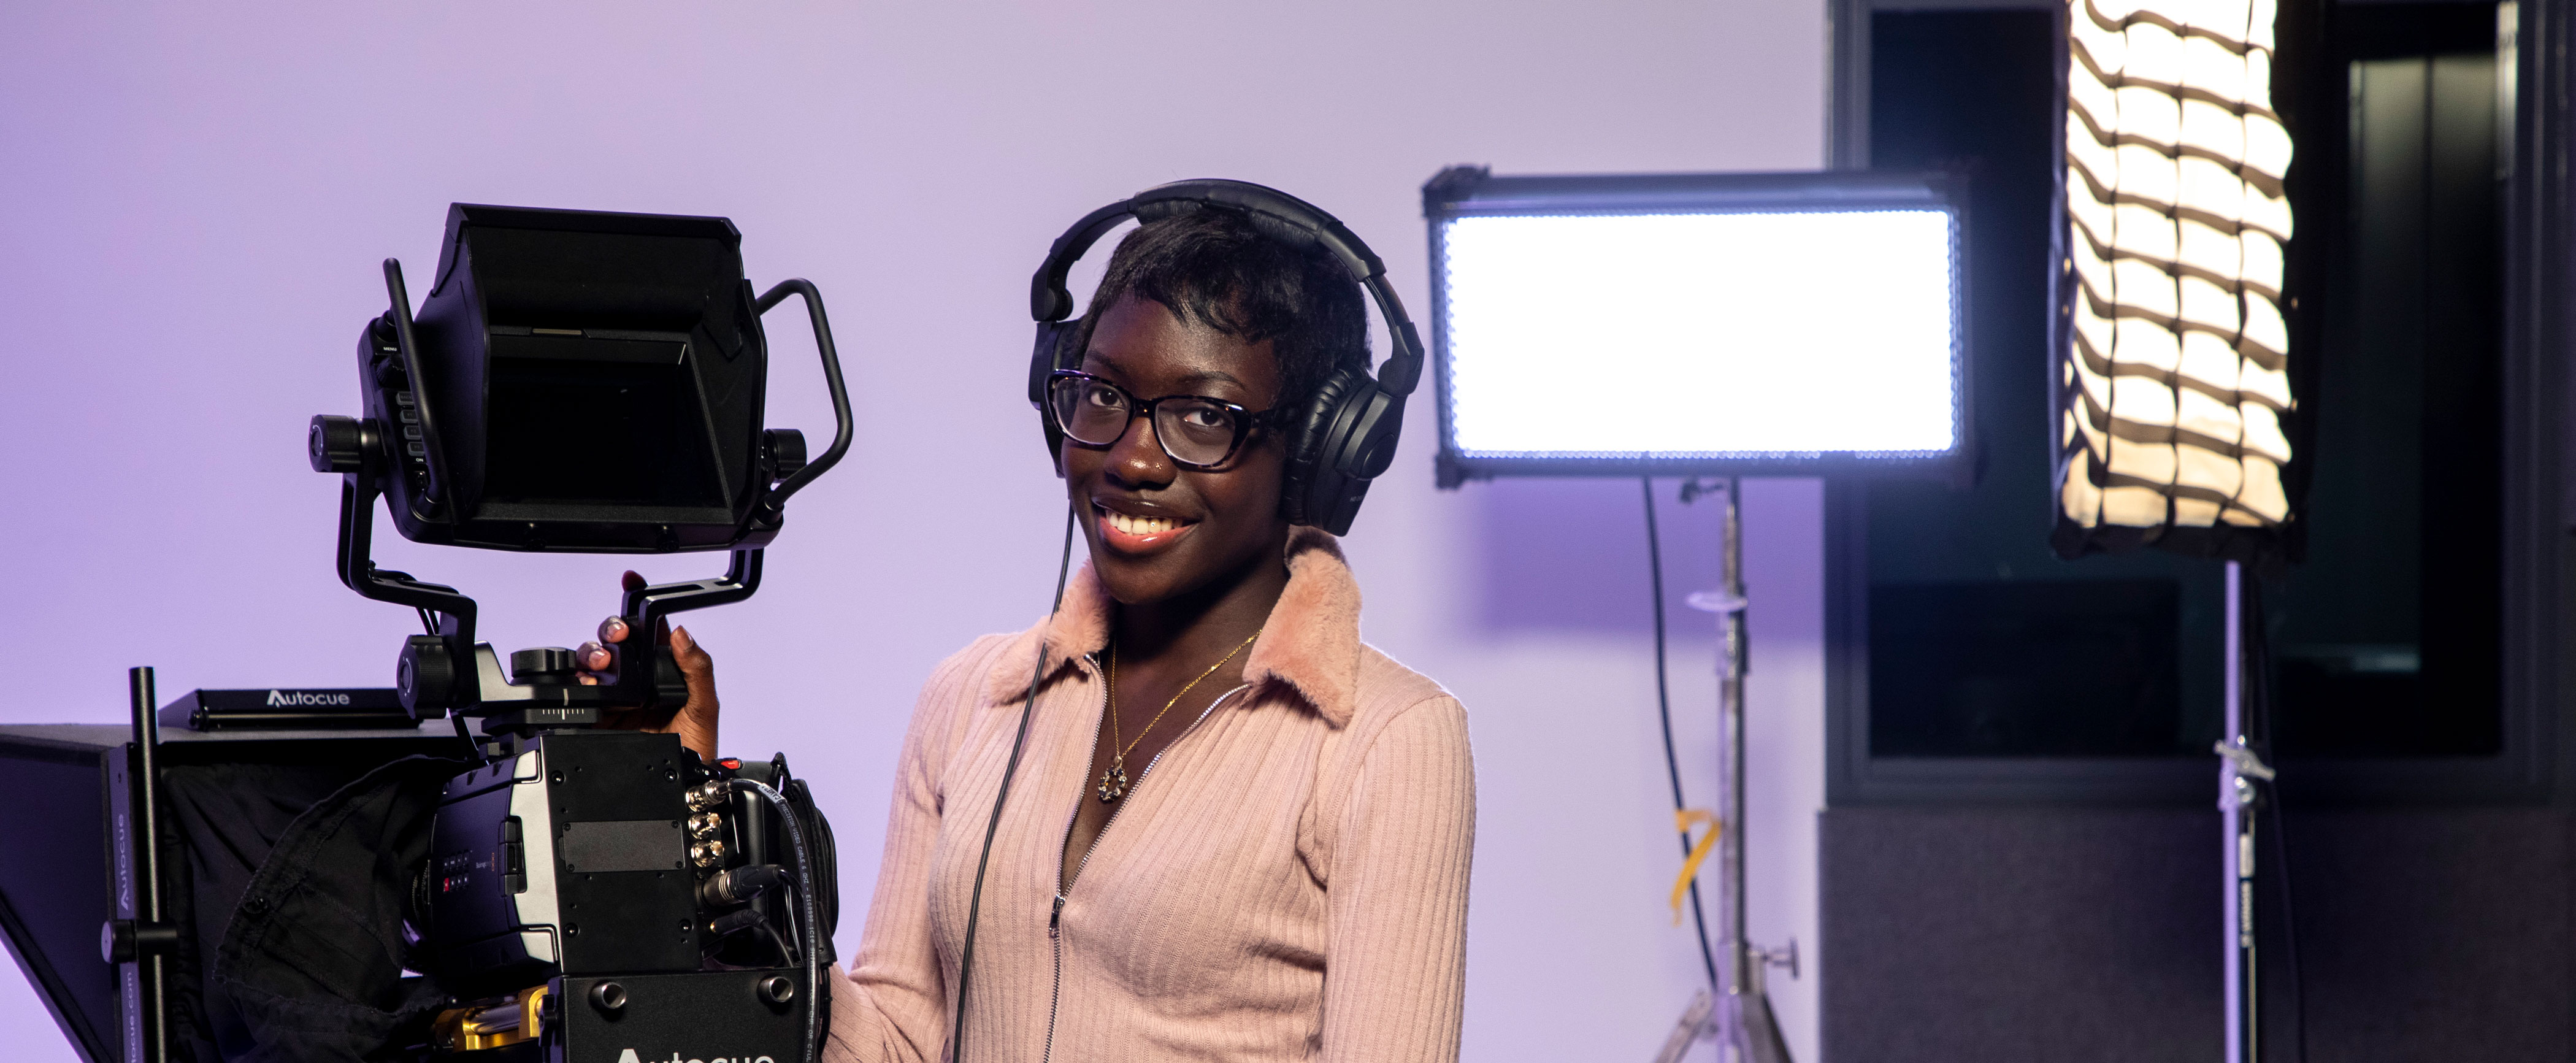 A student wearing a pink blouse and headphones smiles and poses for a photo with camera equipment, including a teleprompter, camera and lighting gear.